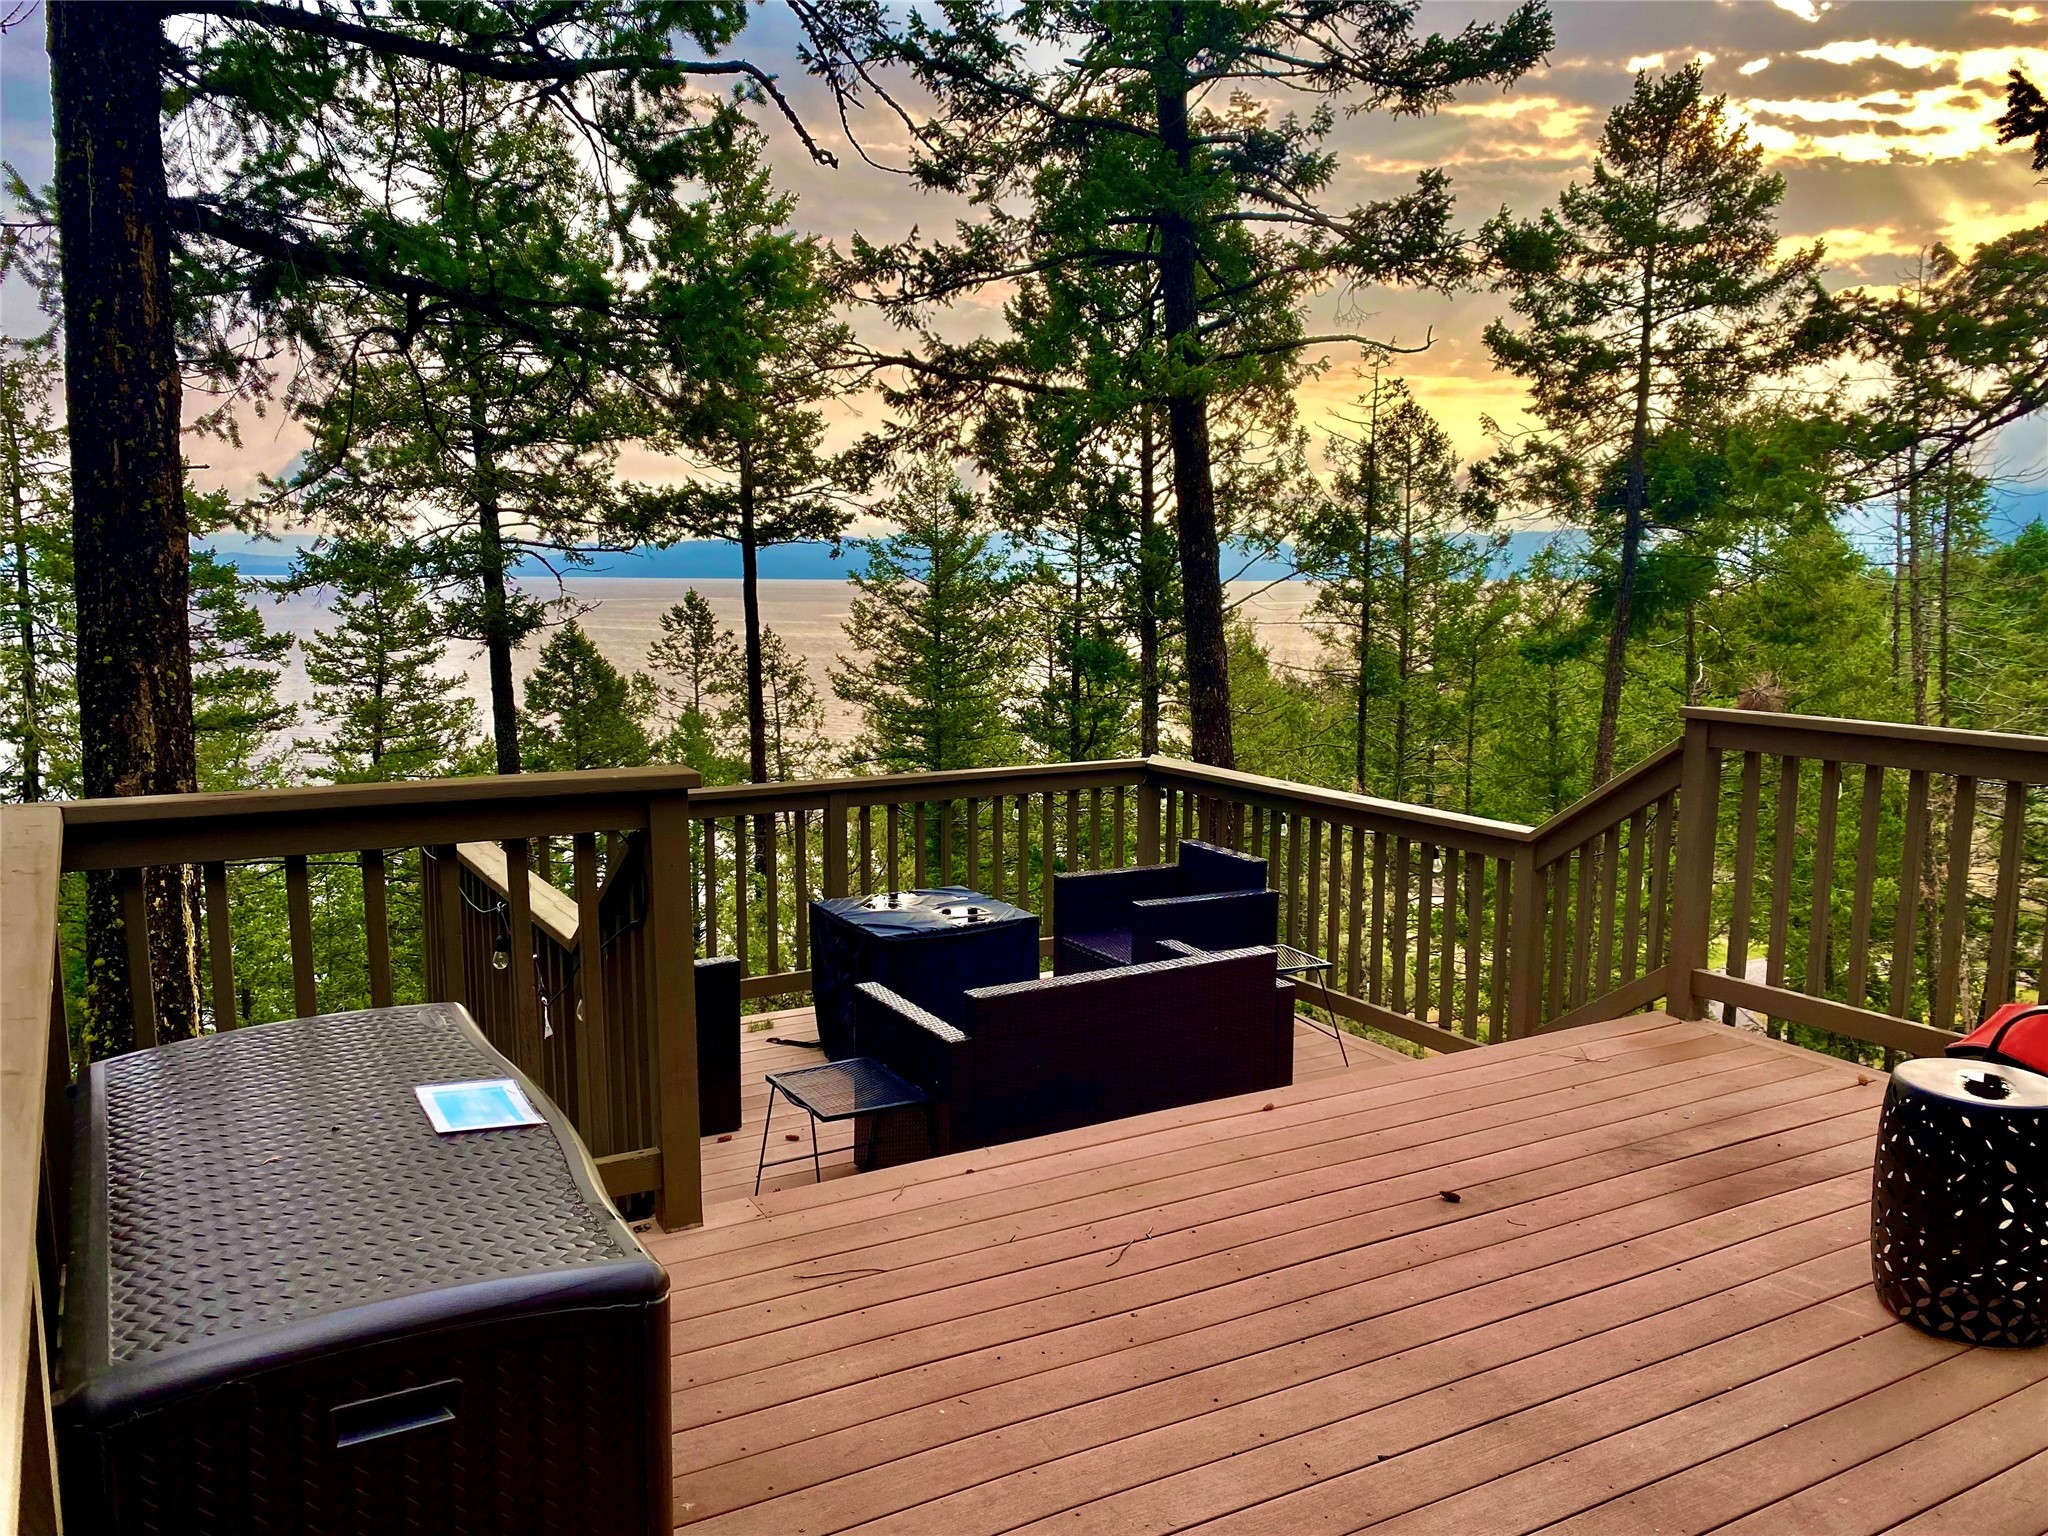 EXTREMELY MOTIVATED SELLERS!! Enhance your investment portfolio and invest in this magical cabin with incredible Flathead Lake views from a sprawling deck! The 1 bedroom, 1 bathroom cabin stuns with an open floor concept and custom cabinets in the kitchen. The large deck is comprised of Trex materials opening up to sparkling Flathead Lake peeking through the trees. The ideal location for a lucrative VRBO, this cabin is suited to store toys, boats, and vehicles in the large heated three-car garage. An adjacent lot is also available from the sellers that would be offered at a VERY REDUCED price if purchased alongside this property. The lot is MLS 30010628. Expand the land for which you have to roam and take delight in the private, tranquil point three miles from Lakeside. Play on the lake and enjoy fishing, hunting, and scenic drives all year long. Recreation is abundant so marketing a vacation rental is simple! A true gem, this mountainside wonder is turn-key with furnishings included! Local Area

 Lakeside, Montana clings to the shore of Flathead Lake along US Highway 93. The tourist town gives visitors access to the lake and gorgeous views of the Swan Mountains. Lakeside is a short fifteen-minute drive south of Kalispell, Montana and two hours north of Missoula, Montana.  

Experience the vibrant historic downtown district of Kalispell, Montana. Kalispell became a city in 1891. Community members donated silver coins to be melted down into a stake to mark the railroad and the town’s beginning. The railroad helped Kalispell thrive by bringing industrial industries such as farming, sawmills, and flour mills. The mountain town is situated in the center of the Flathead Valley and serves as an excellent base camp for those traveling around northwest Montana. The town has shopping, three golf clubs, restaurants, art galleries, and access to outdoor activities. 

Tucked into the bay where the Swan River flows into Flathead Lake, the charming town of Bigfork, Montana offers a resting place for tourists and lake-goers. The town has golf, fine restaurants, art galleries, and live theatre. It holds many titles one of which is “One of the 100 Best Small Art Towns in the Nation.”
 

Area Attractions
 

Flathead Lake 

Flathead Lake is a popular destination in Western Montana with over 200 square miles of water to kayak, boat, paddleboard, canoe, swim, fish, and recreate on. The vast lake spans 30 miles and measures a depth of 300 feet. It is the largest natural freshwater lake on this side of the Mississippi! Stop at one of the many roadside stands in the summer months to purchase fresh and locally grown cherries, apples, plums, and other produce. Cabins, campgrounds, vacation rentals, and hotels are scattered along the shoreline offering superb lodging. This hotspot is surrounded by the Mission, Salish, Swan, and Whitefish mountains making it a beautiful vacation destination. 

Glacier National Park 

The coveted area nicknamed the “Crown of the Continent” for obvious reasons offers gems and views of gold in the state of Montana. With over 700 miles of trails through pristine forests, alpine meadows sprinkled with bright lovely wildflowers, rugged and tenacious mountains, and spectacular sparkling lakes. Visit the historic chalets and lodges for a walk back in time or backpack, cycle, hike, or camp. While taking in the astounding sights of the glacier-carved peaks and valleys, set your binoculars on a diverse range of wildlife of bighorn sheep, mountain goats, deer, elk, ptarmigan, and both black and grizzly bears. This highway to heaven is a tough one to ever forget. 

Winter Recreation 

Whitefish Mountain Ski Resort 

The Whitefish Mountain Ski Resort is located in Whitefish, Montana on Big Mountain. There are over 100 trails on 3,000 acres of terrain. The vertical drop on Big Mountain is 2,353 feet and is served by 11 chairlifts, two T-bars, and a magic carpet. 

Blacktail Mountain Ski Area 

The Blacktail Mountain Ski Area is a tight-knit family-style atmosphere 28 miles southwest of Kalispell. The vertical drop is 1,440 feet served by 3 chairlifts and a rope tow. There are almost 30 trails with a vast majority being easy or intermediate in difficulty.